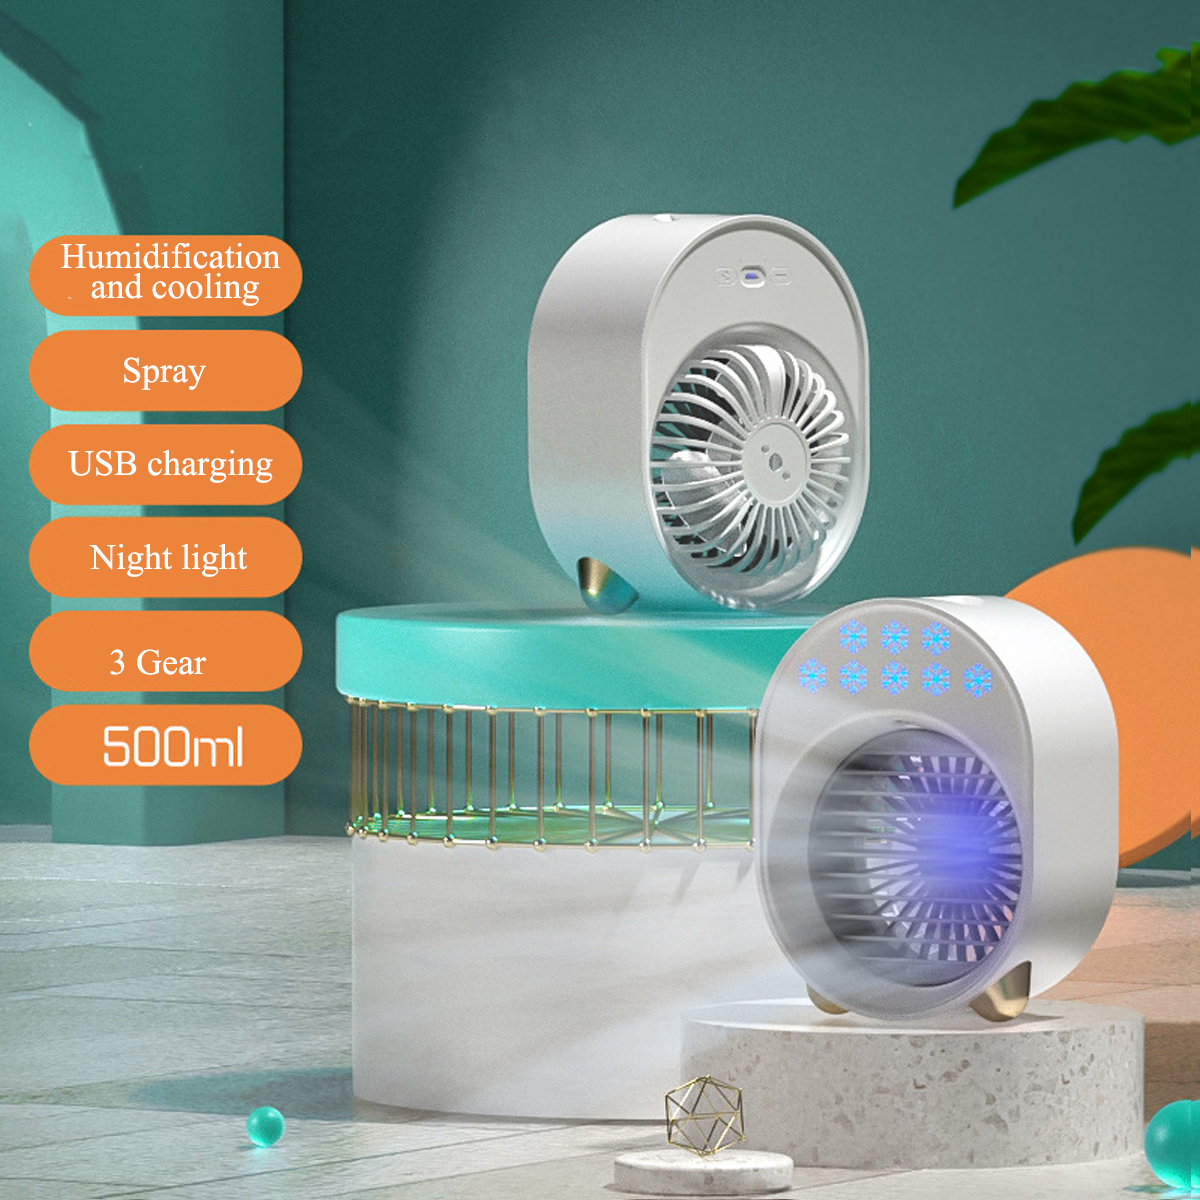 Bakeey-3-Gear-Mini-Water-Cooling-Fan-Spray-Humidification-Portable-Colorful-Night-Light-Air-Cooler-T-1838417-10